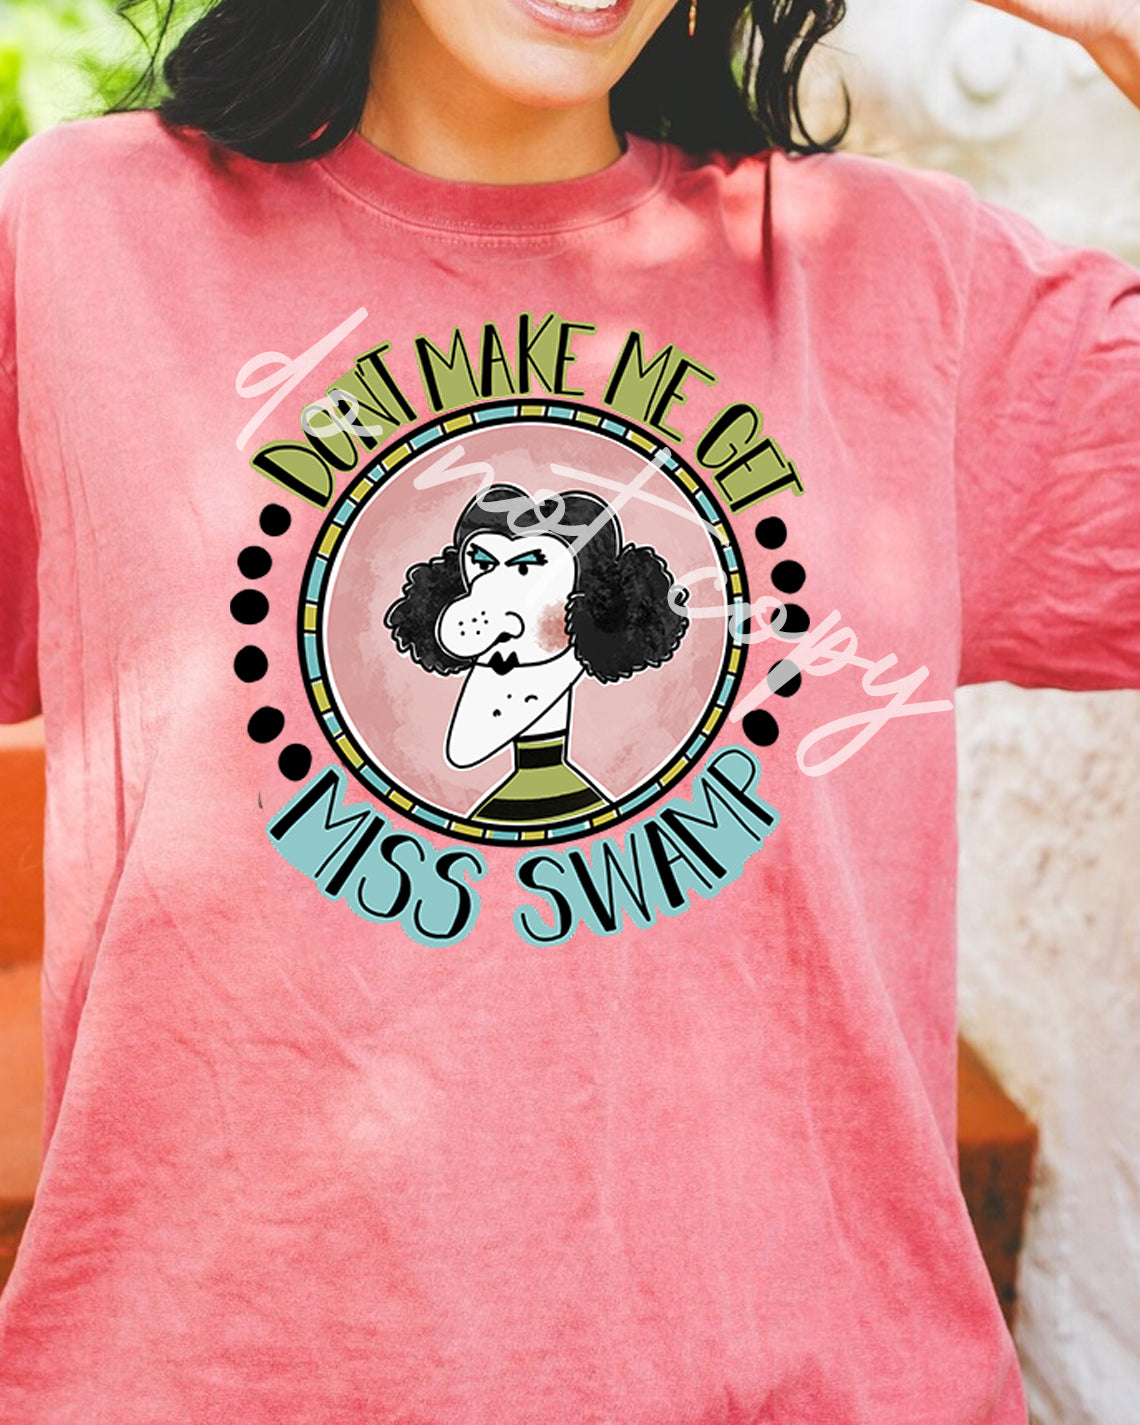 Don't Make Me Get Miss Swamp Graphic Tee